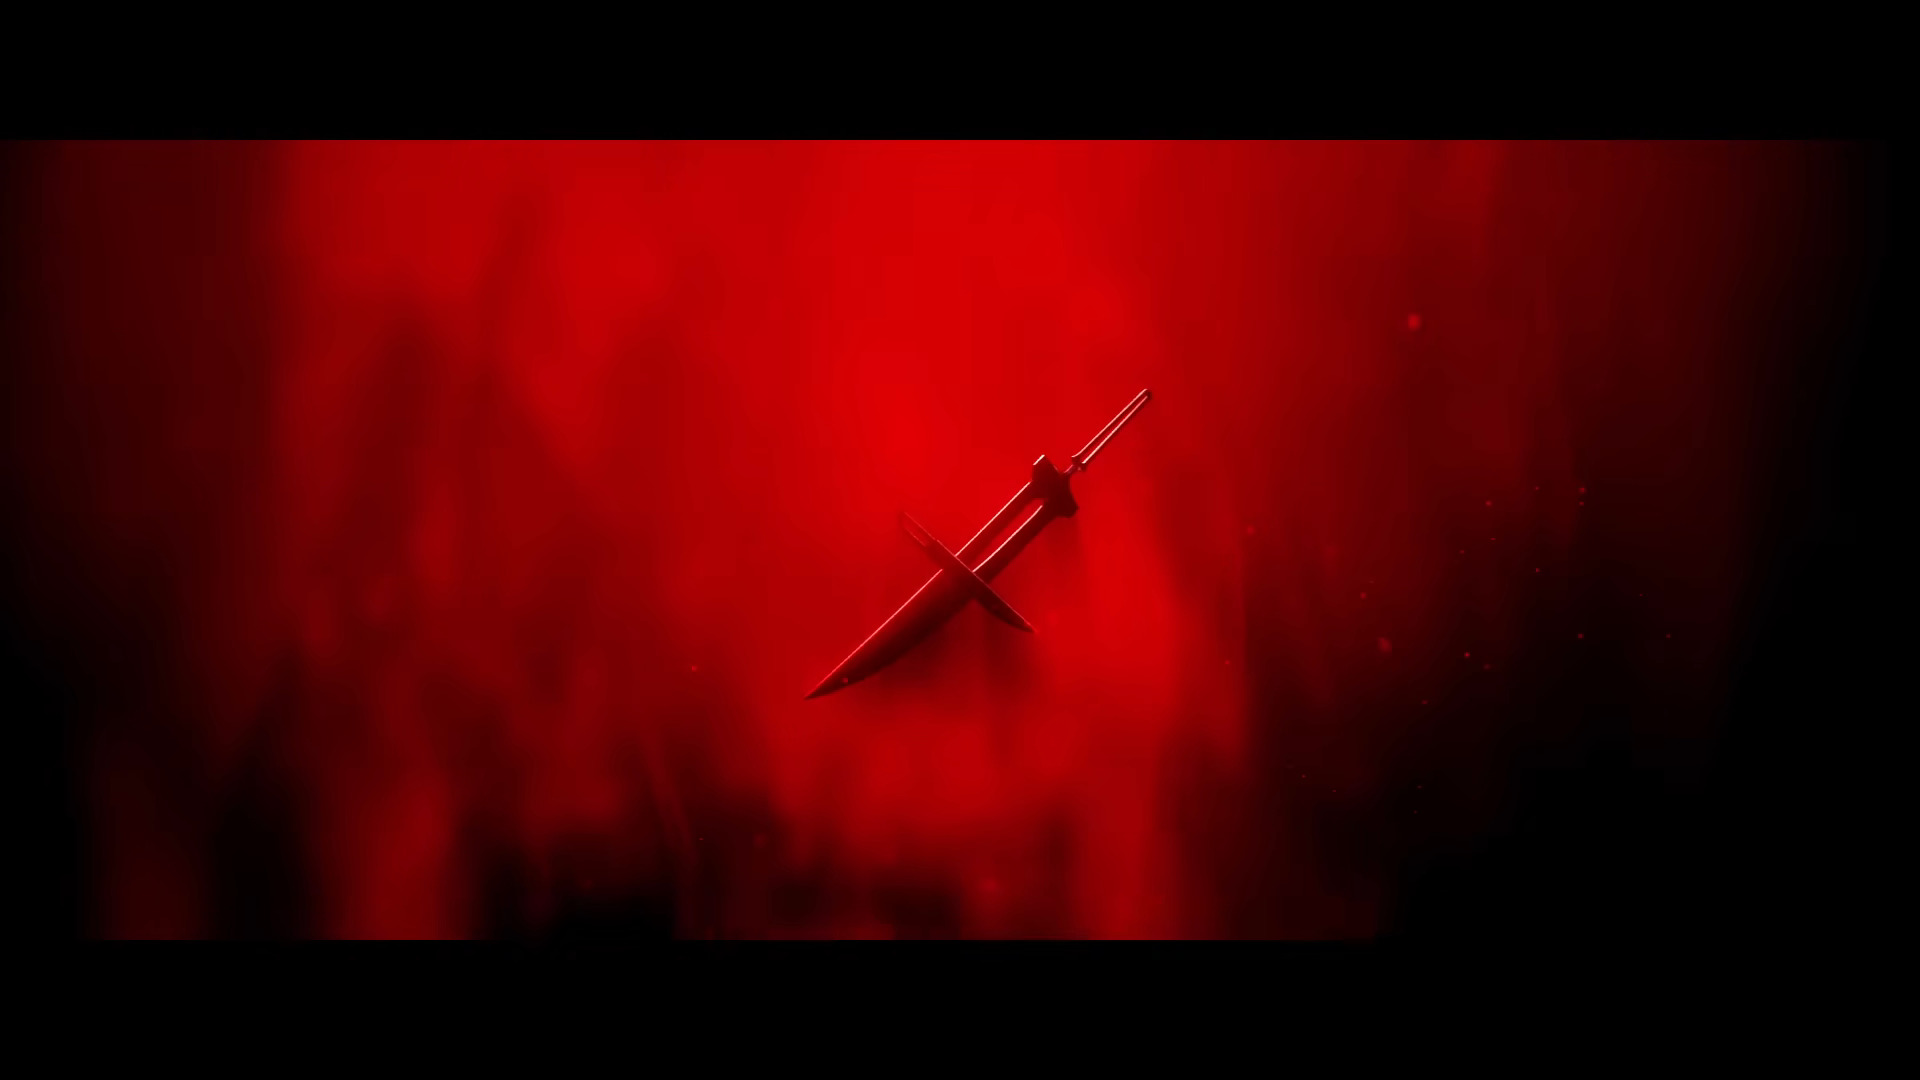 Ichigo's Zangetsu takes on its final form as it floats through a sea of red in Bleach: Thousand-Year Blood War - The Separation PV (2023), Pierrot via Youtube